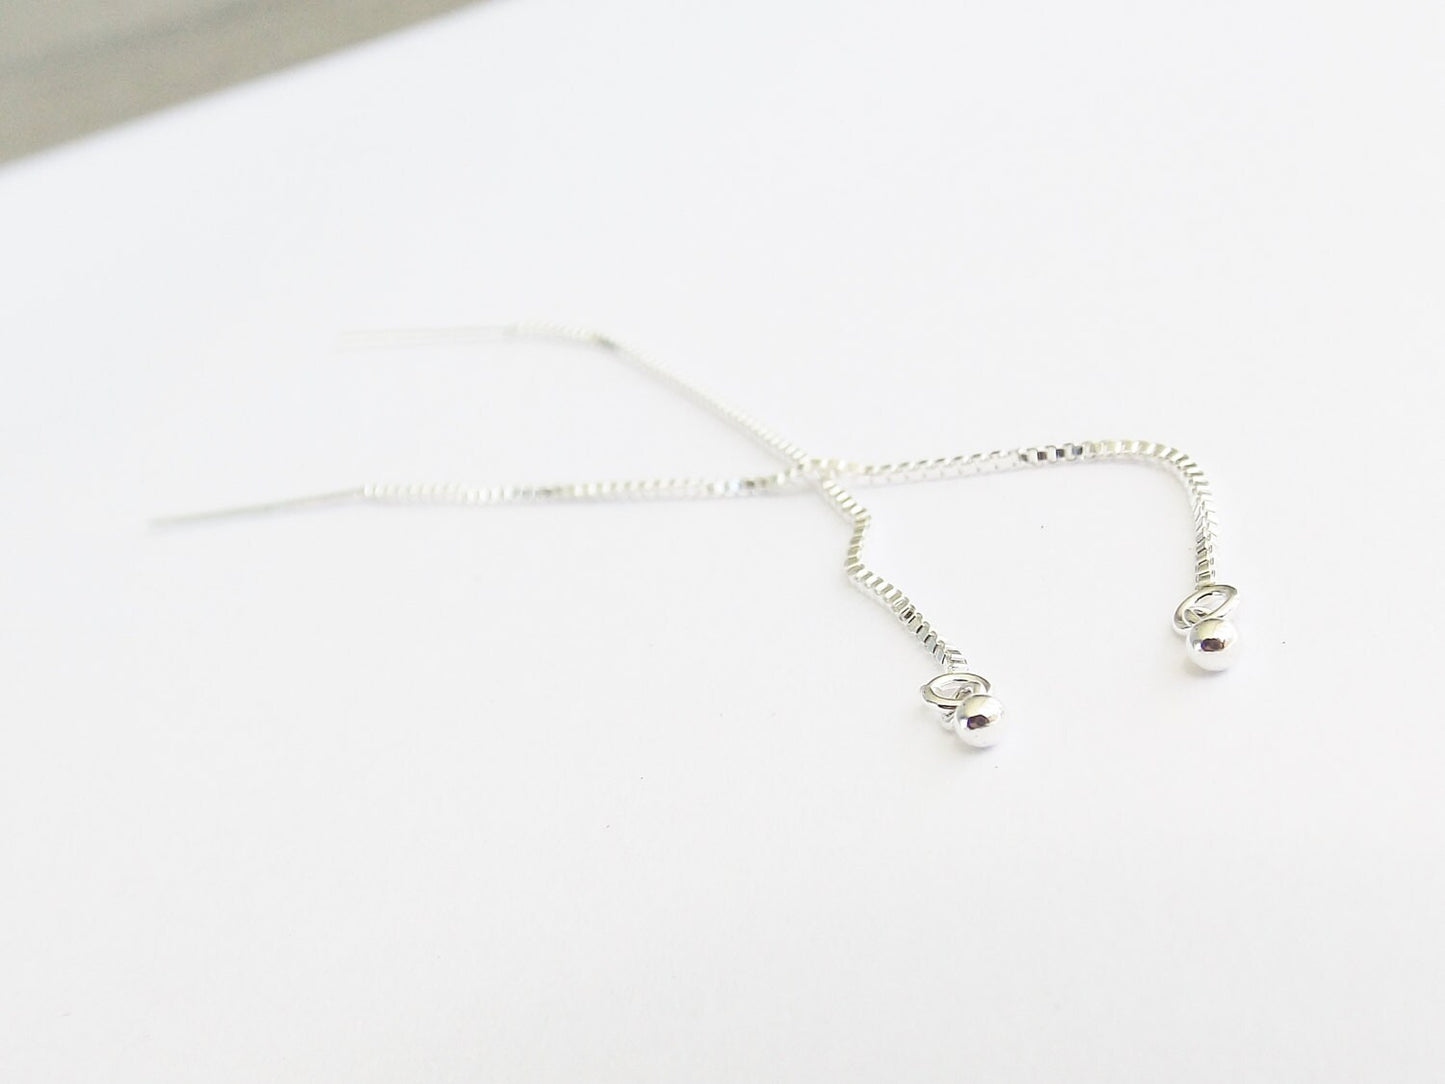 Threader Earrings,Simple Threaders,Super Tiny Bead Threader,Sleek Earrings,Simple Everyday,Modern Jewelry,Unique Slender,Silver Drop Earring